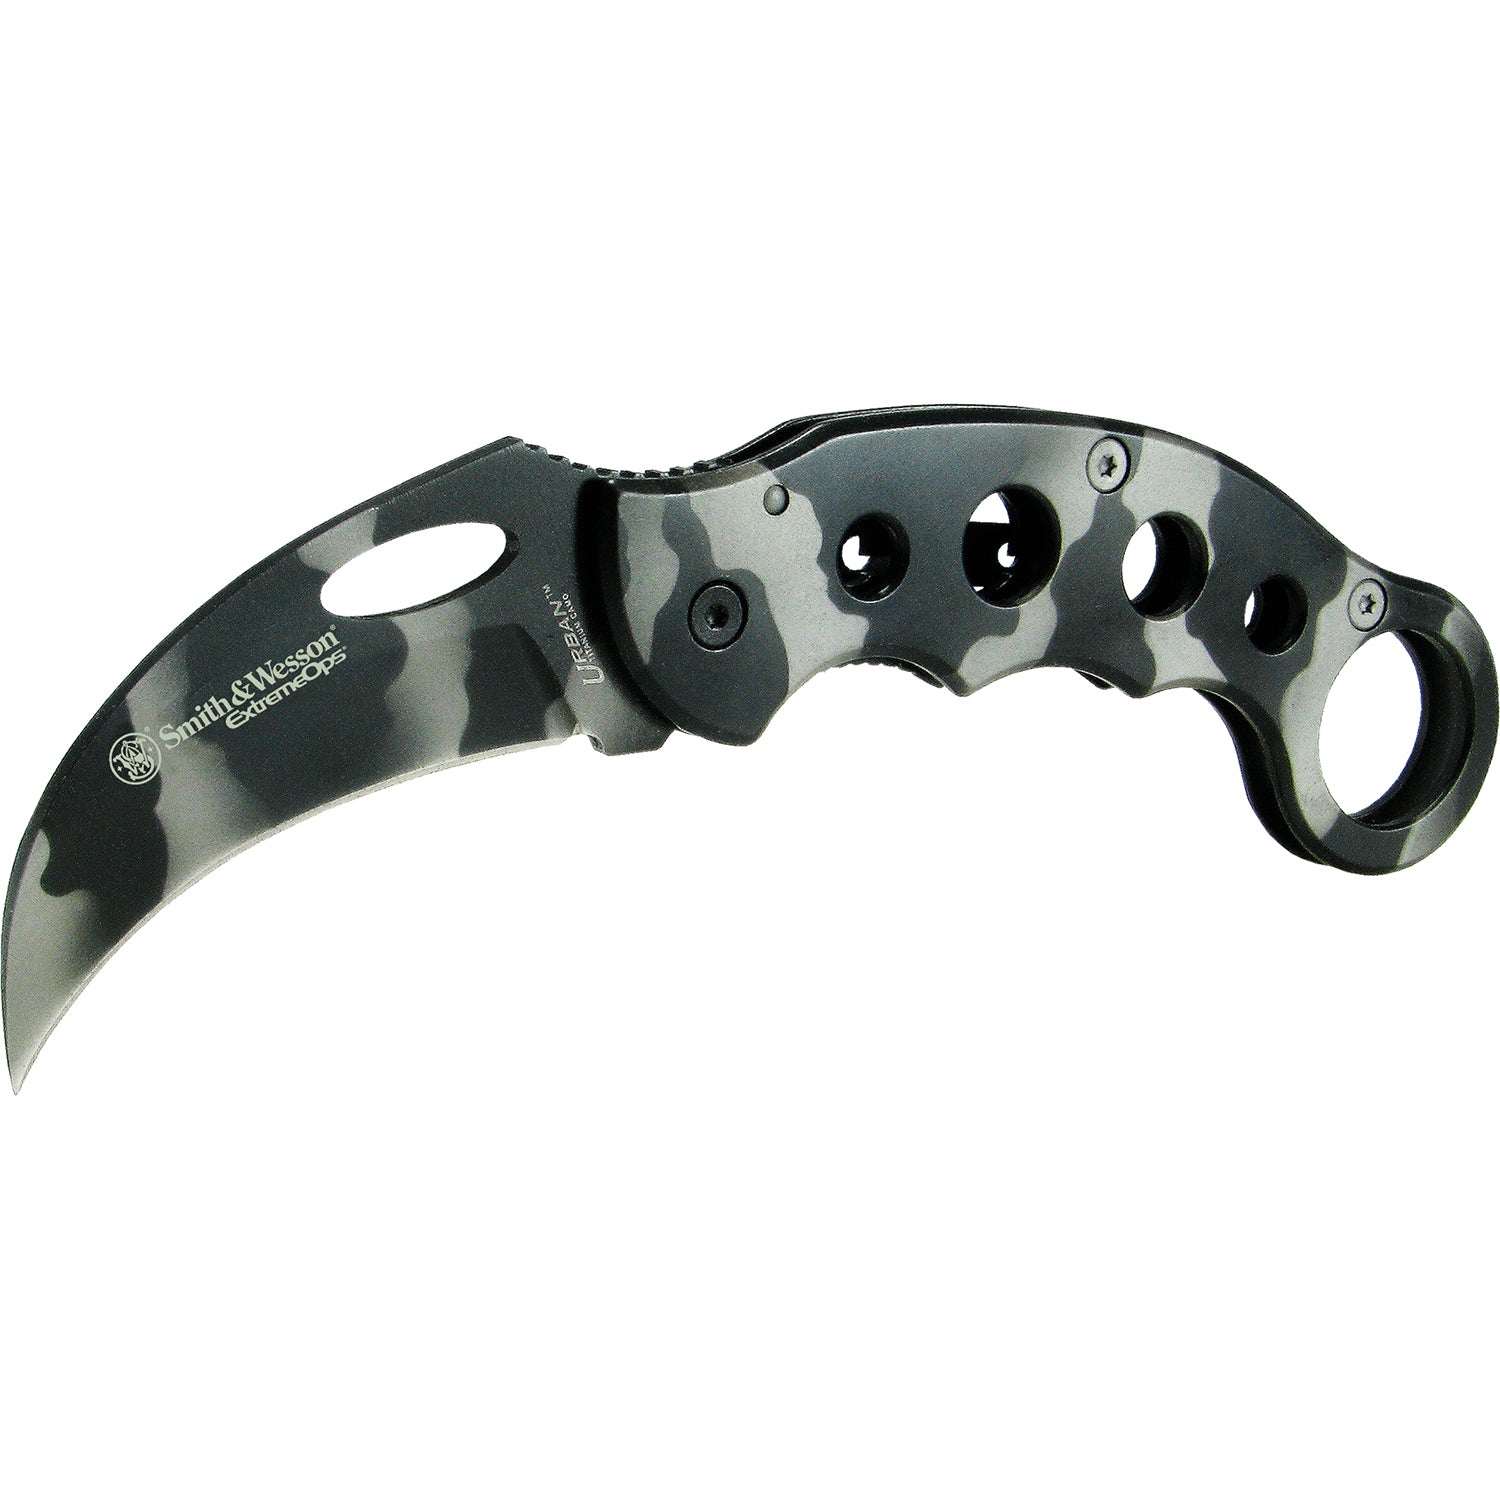 SW Extreme Ops Karambit Folder 2.75 in Camo Blade SS Handle